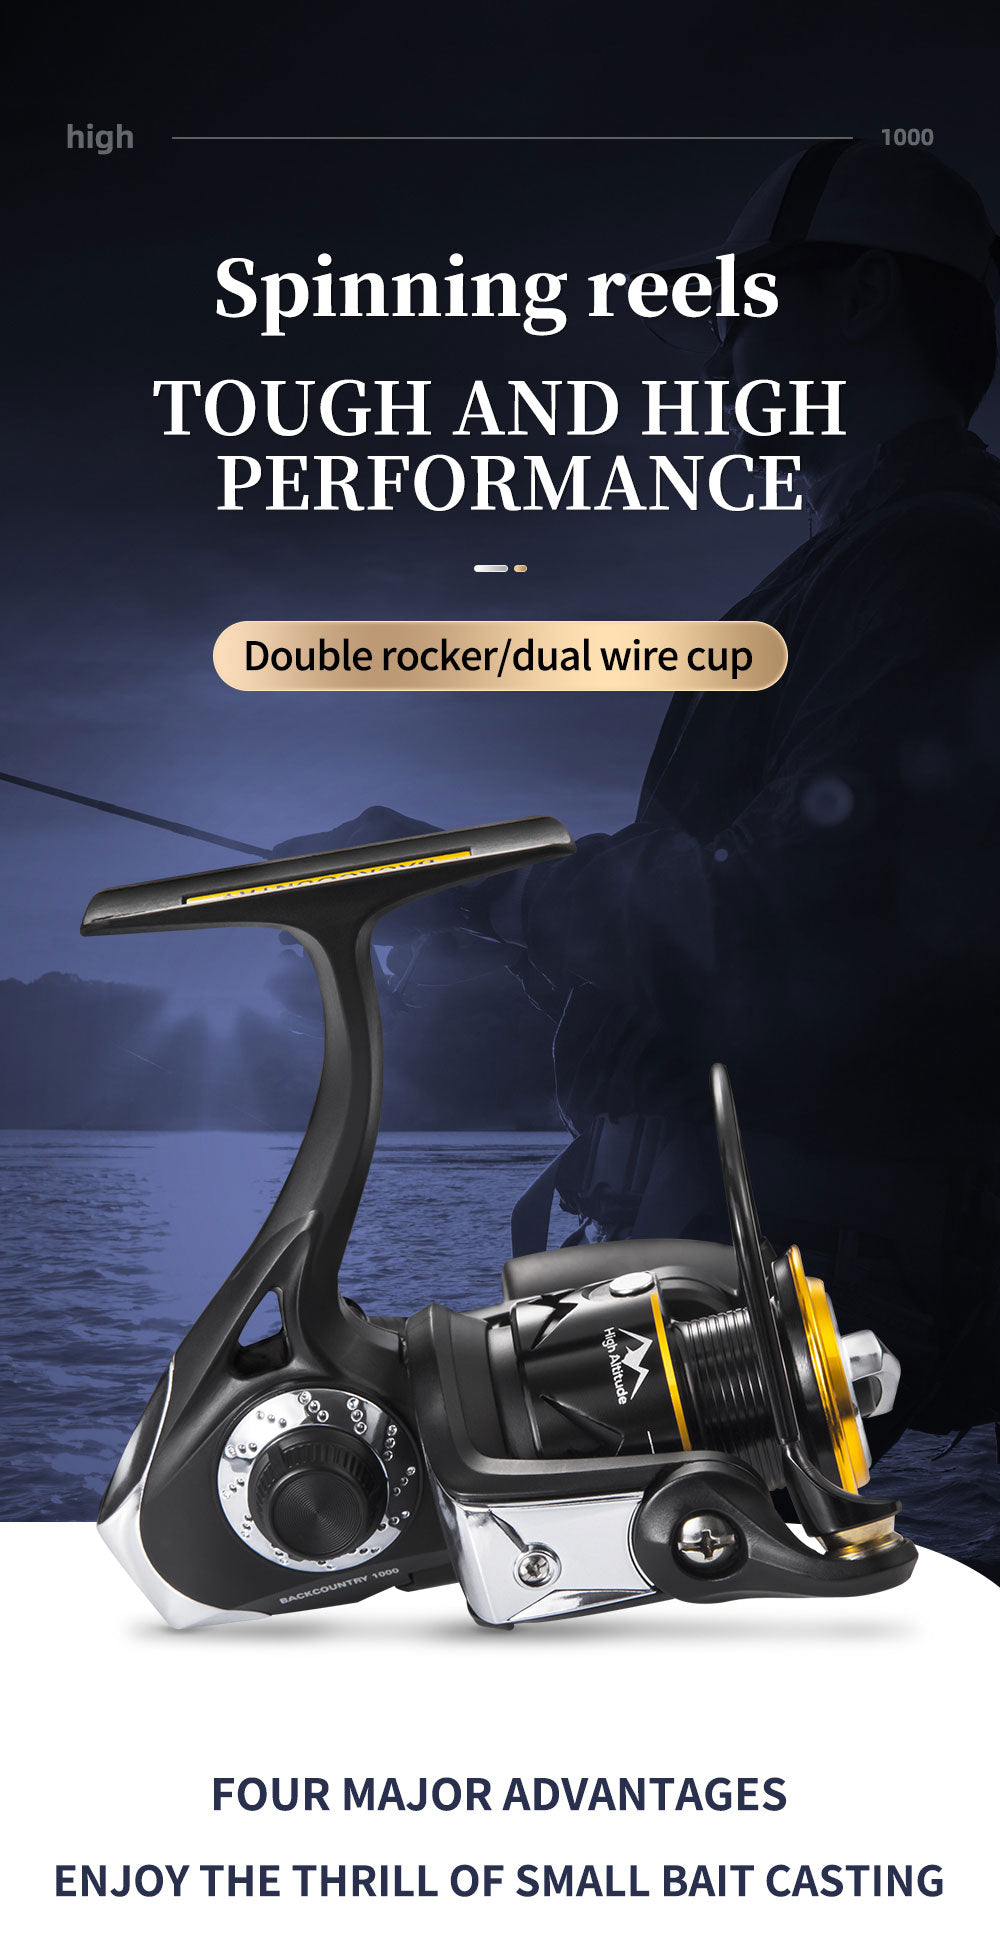 NGK Long Shot Reels 17+1BB Saltwater Reels With 55lbs Max Drag For Jigging,  Spinning & Surfing Reels Series 8000/9000/10000/12000/14000 From Zcdsk,  $63.35